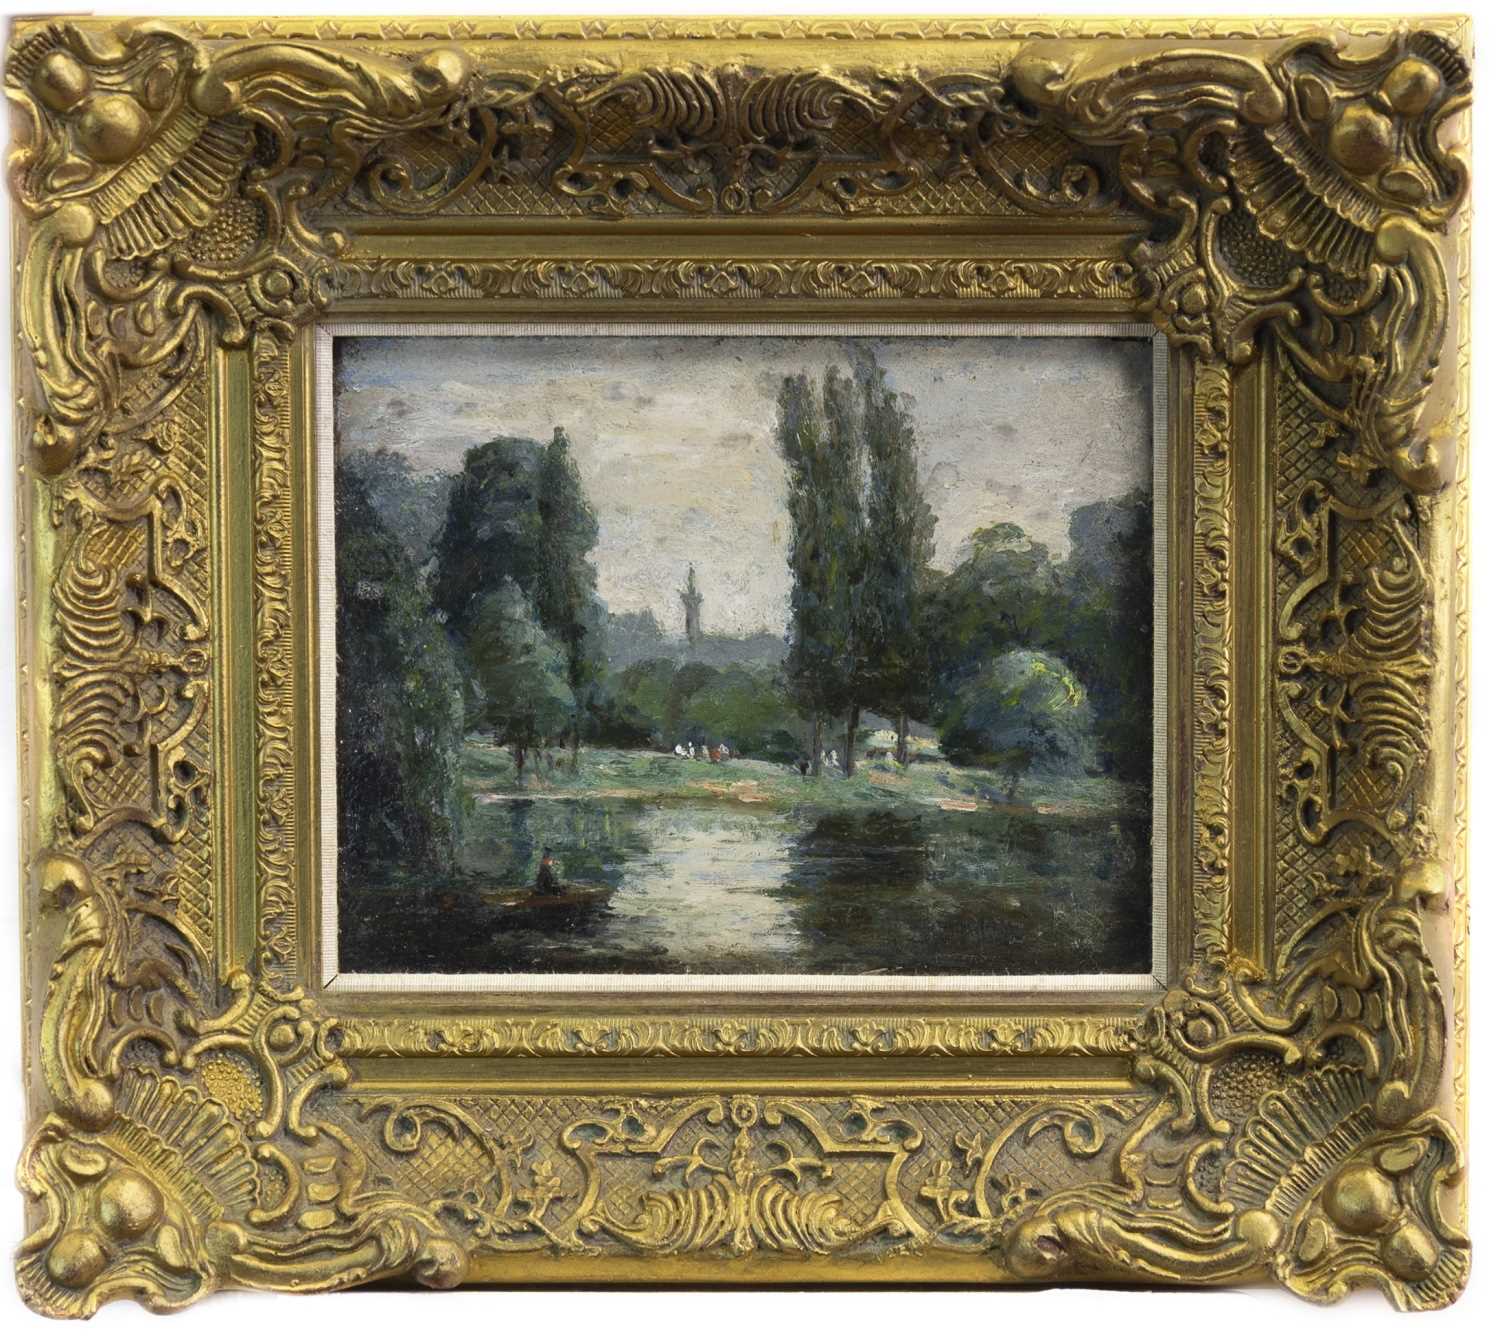 Lot 442 - BOATING ON THE POND, AN OIL BY ALEXANDER JAMIESON